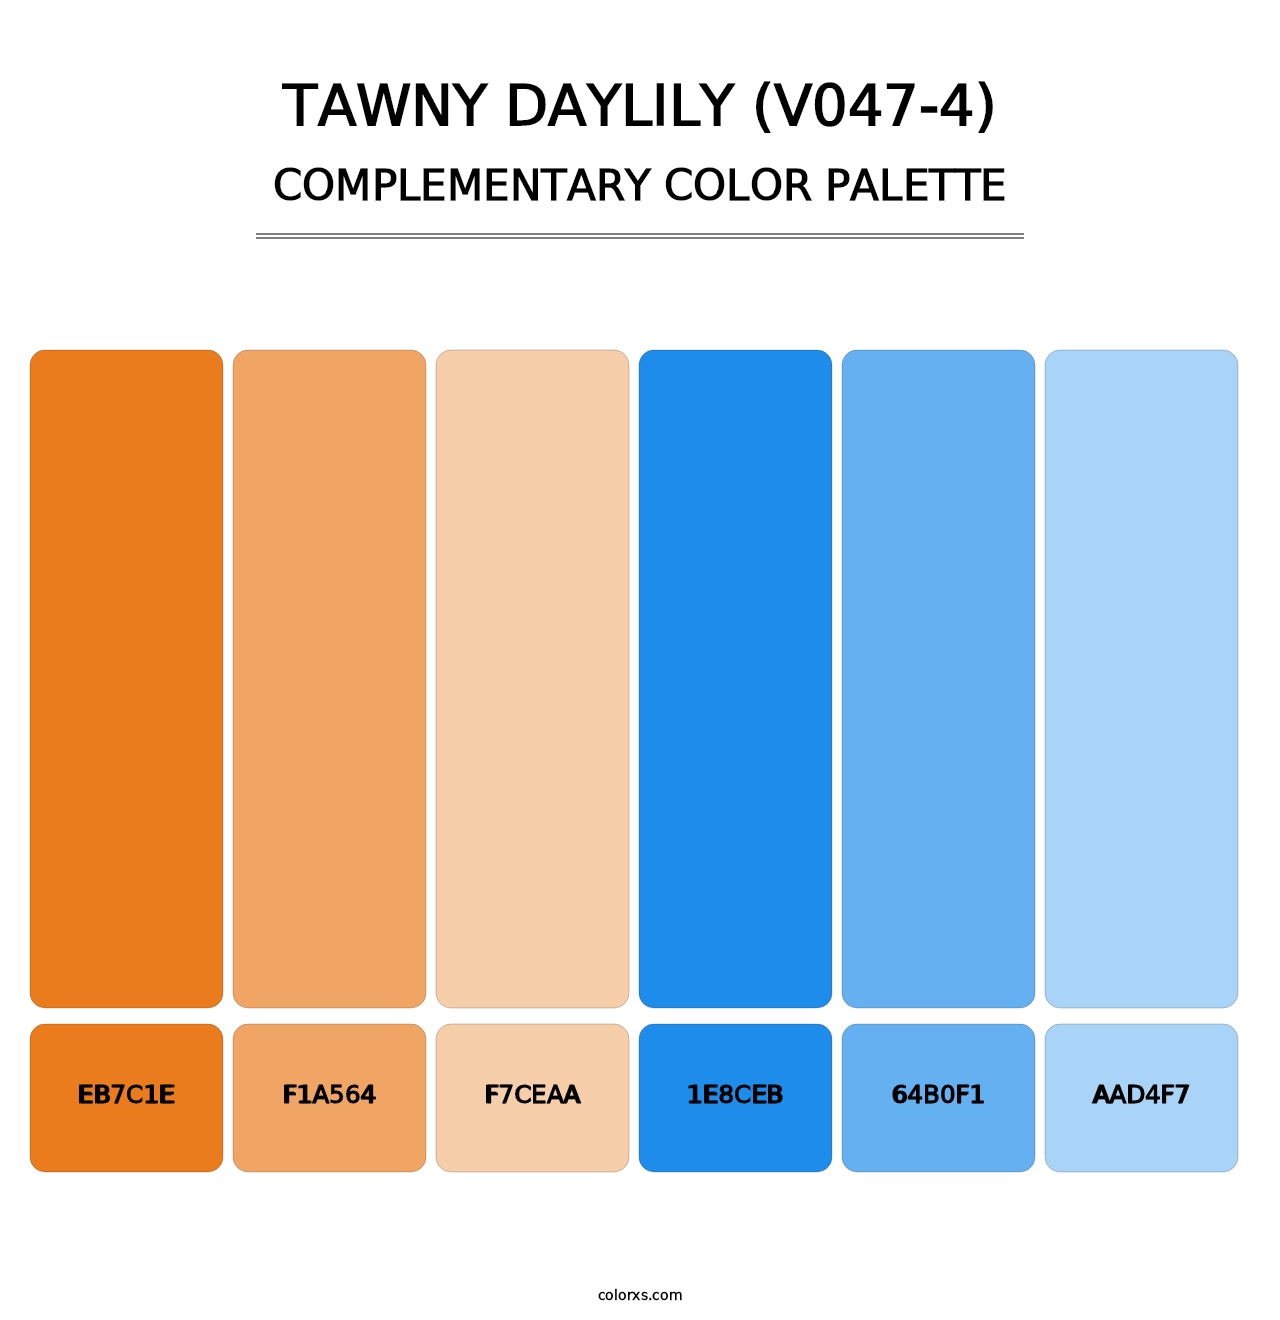 Tawny Daylily (V047-4) - Complementary Color Palette